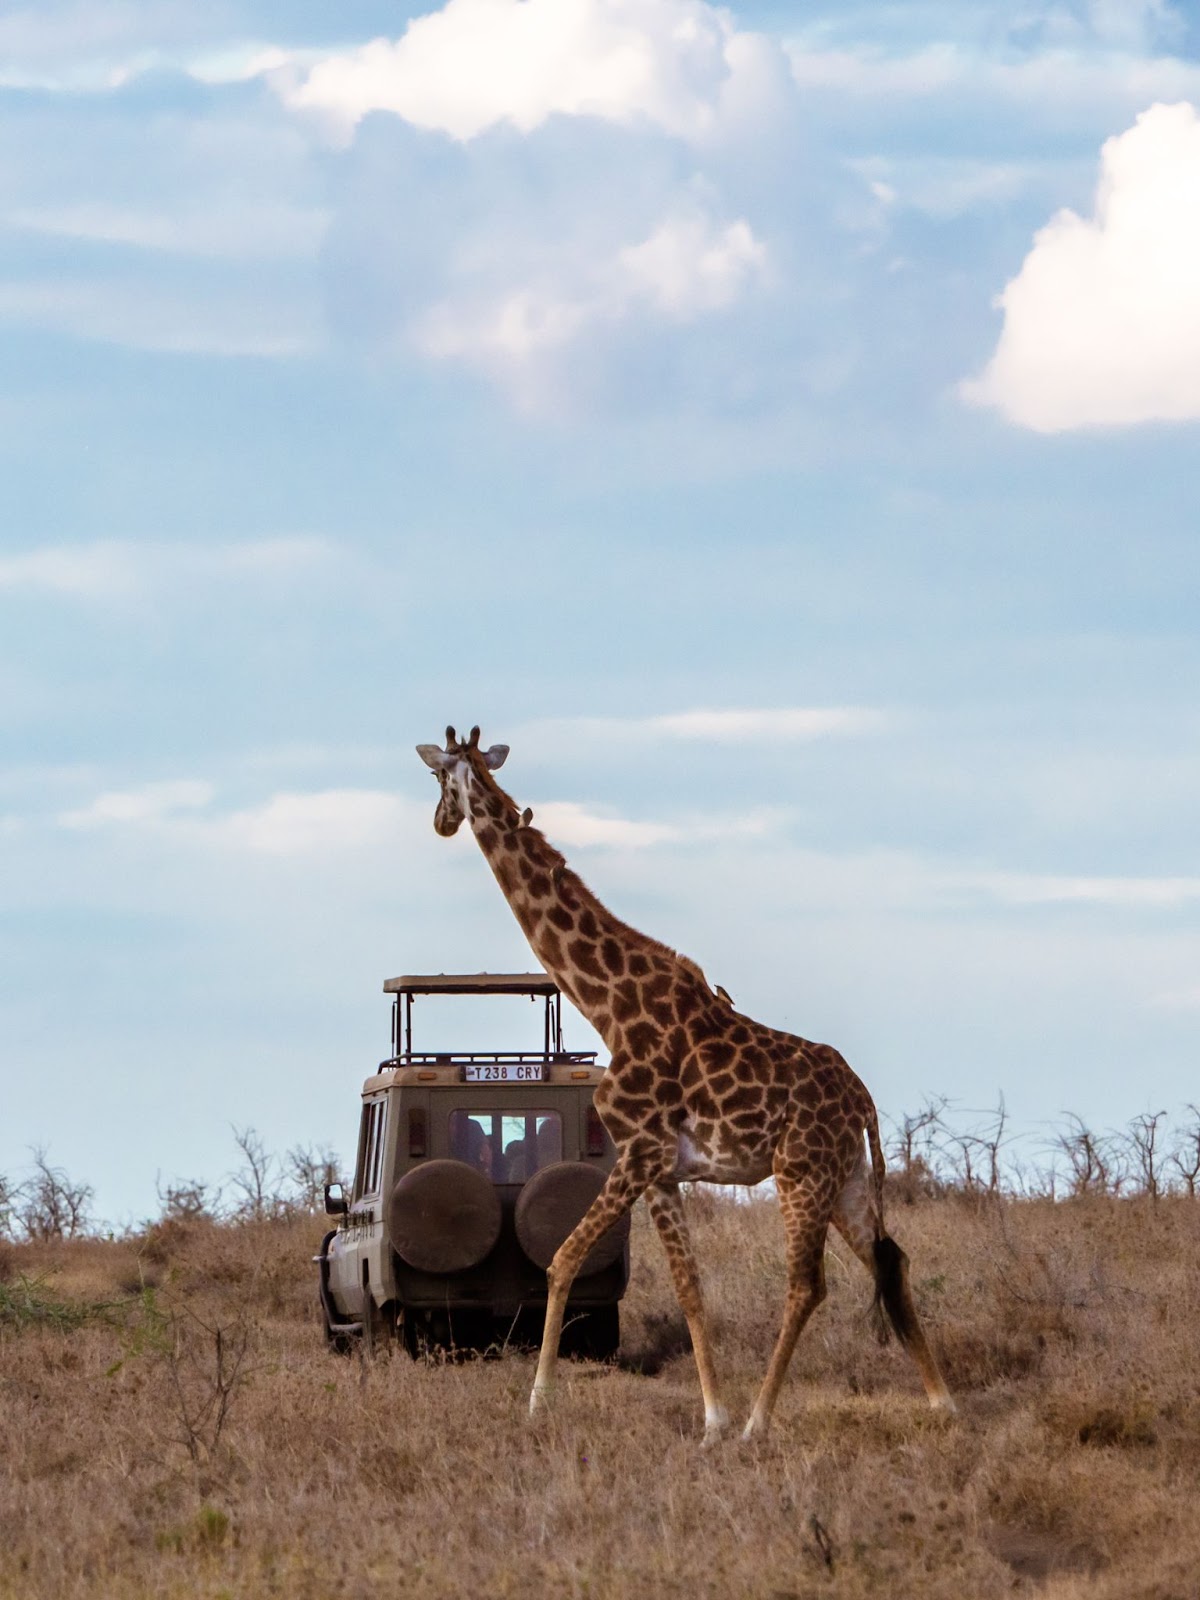 A Trip to Africa is not a glorified zoo experience. 